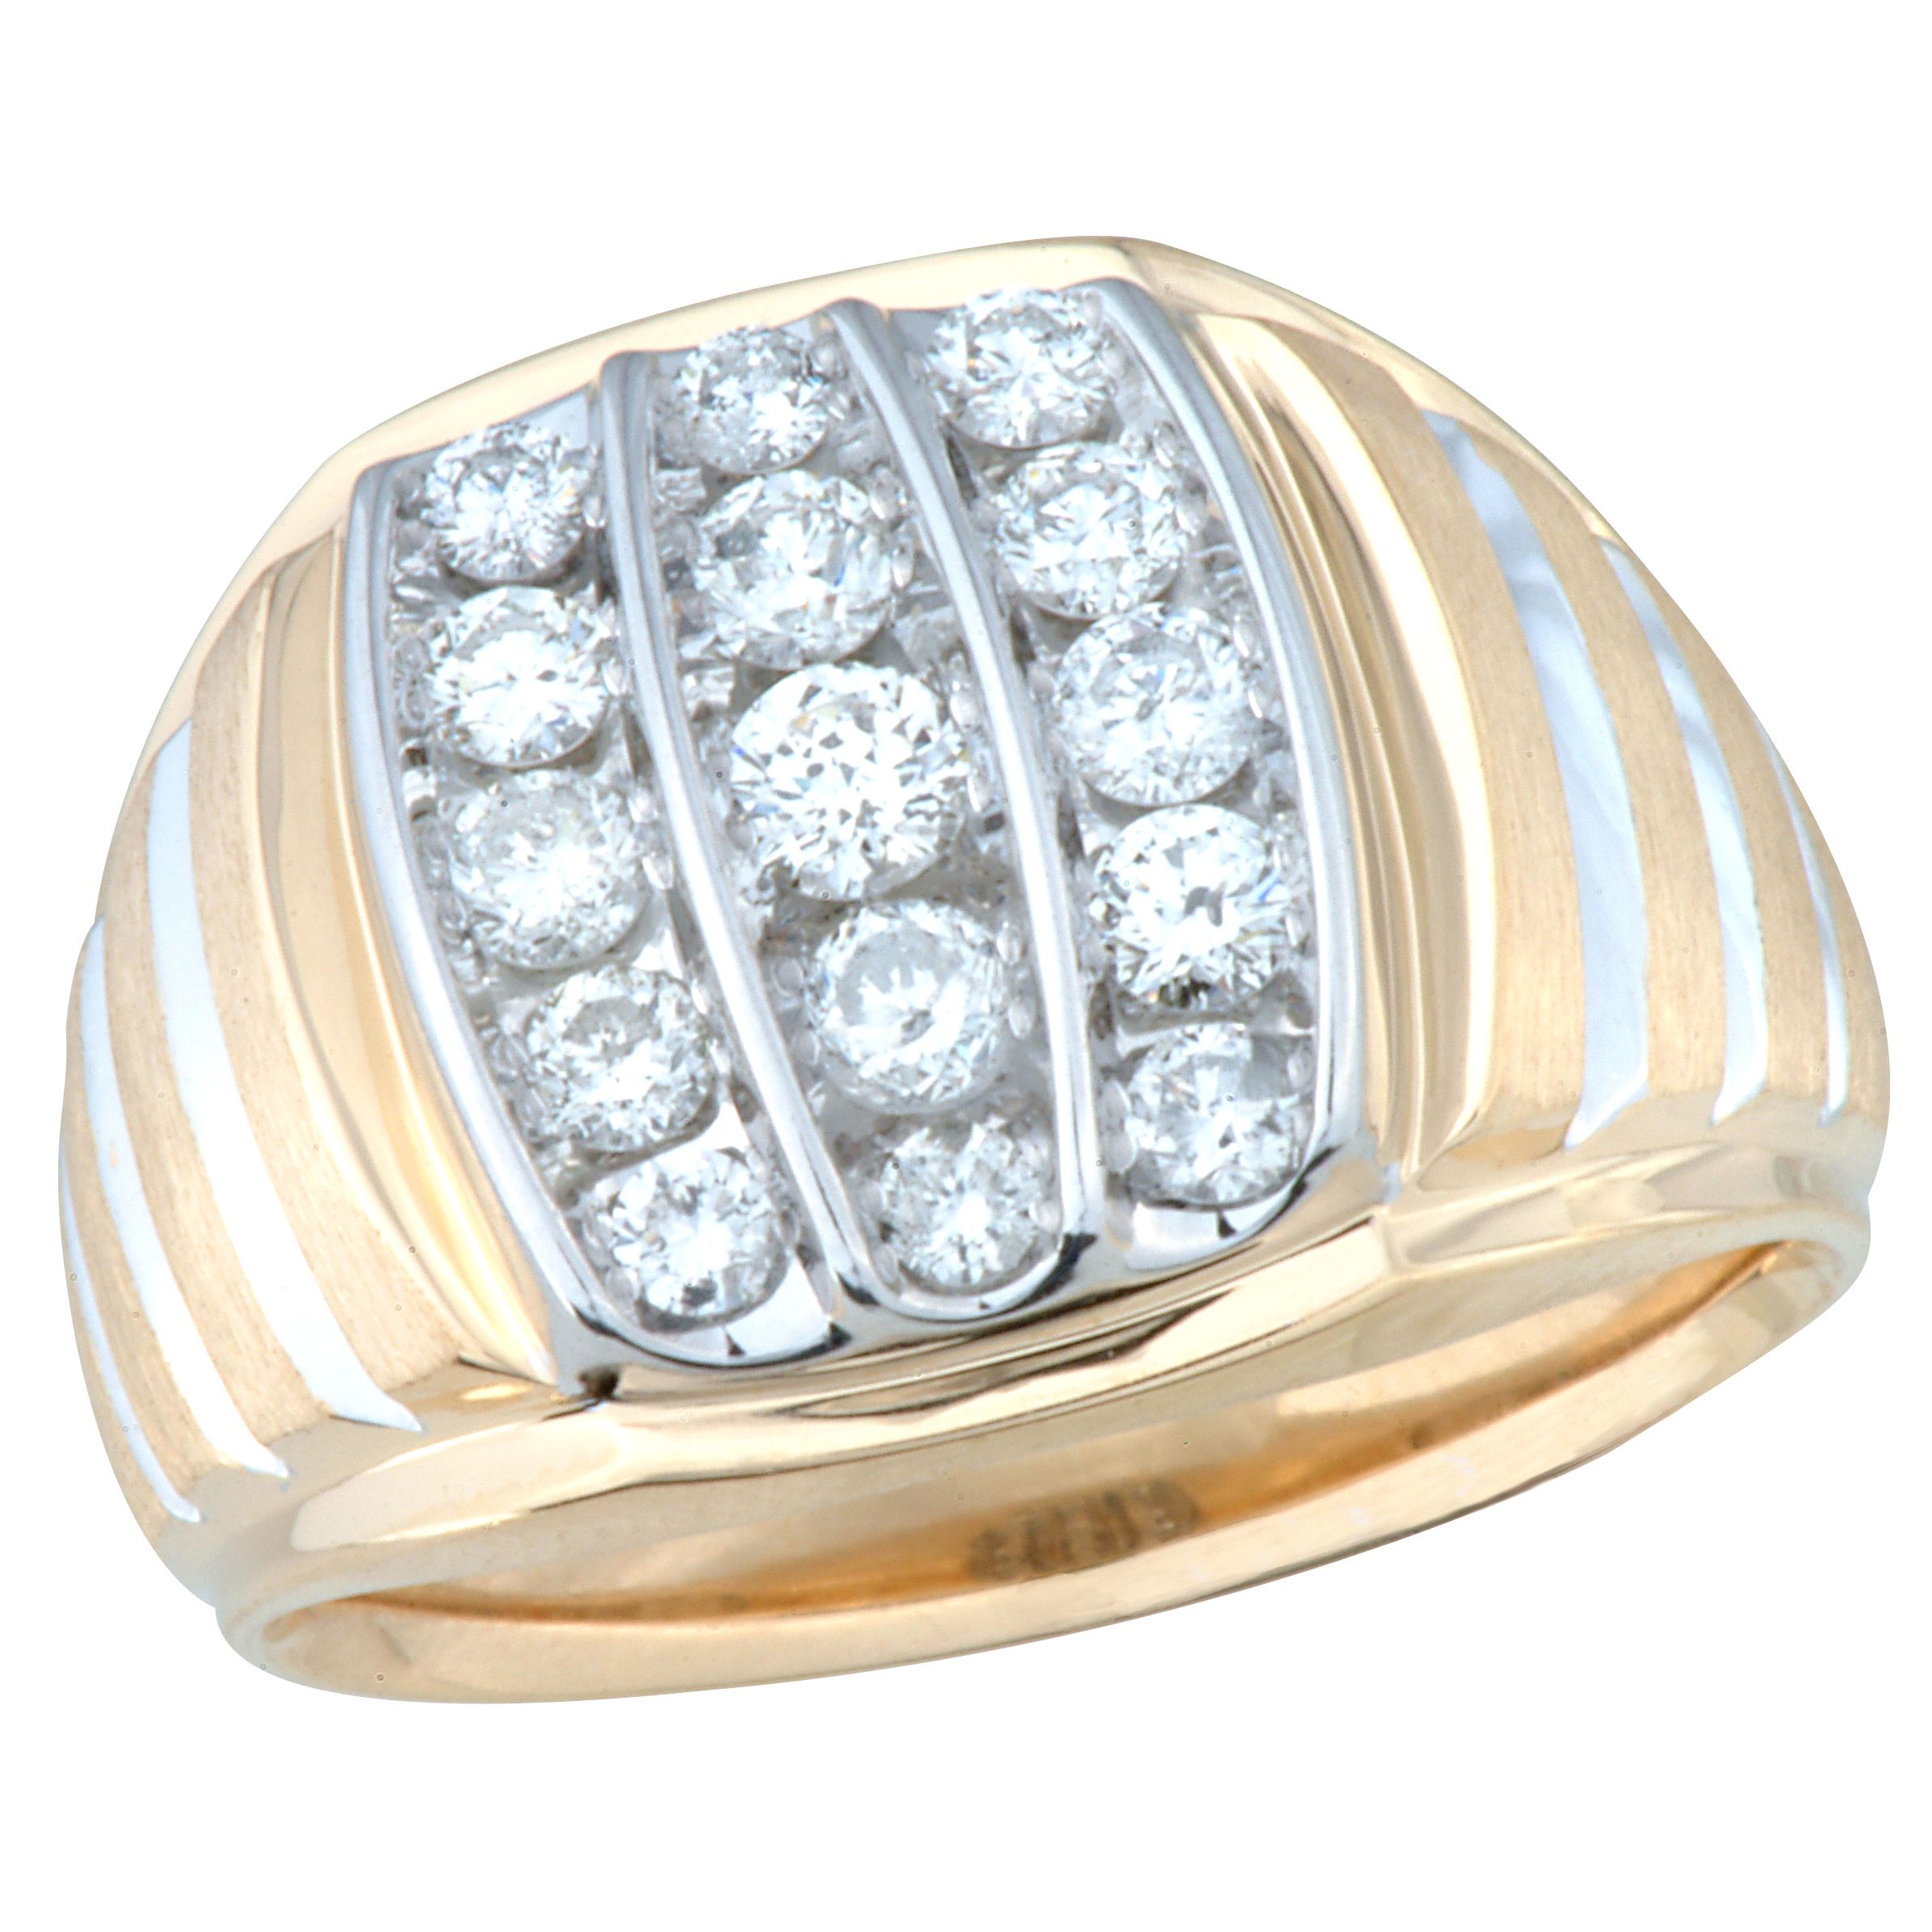 1 ct. tw.* Diamond and Two-tone Gold Ring